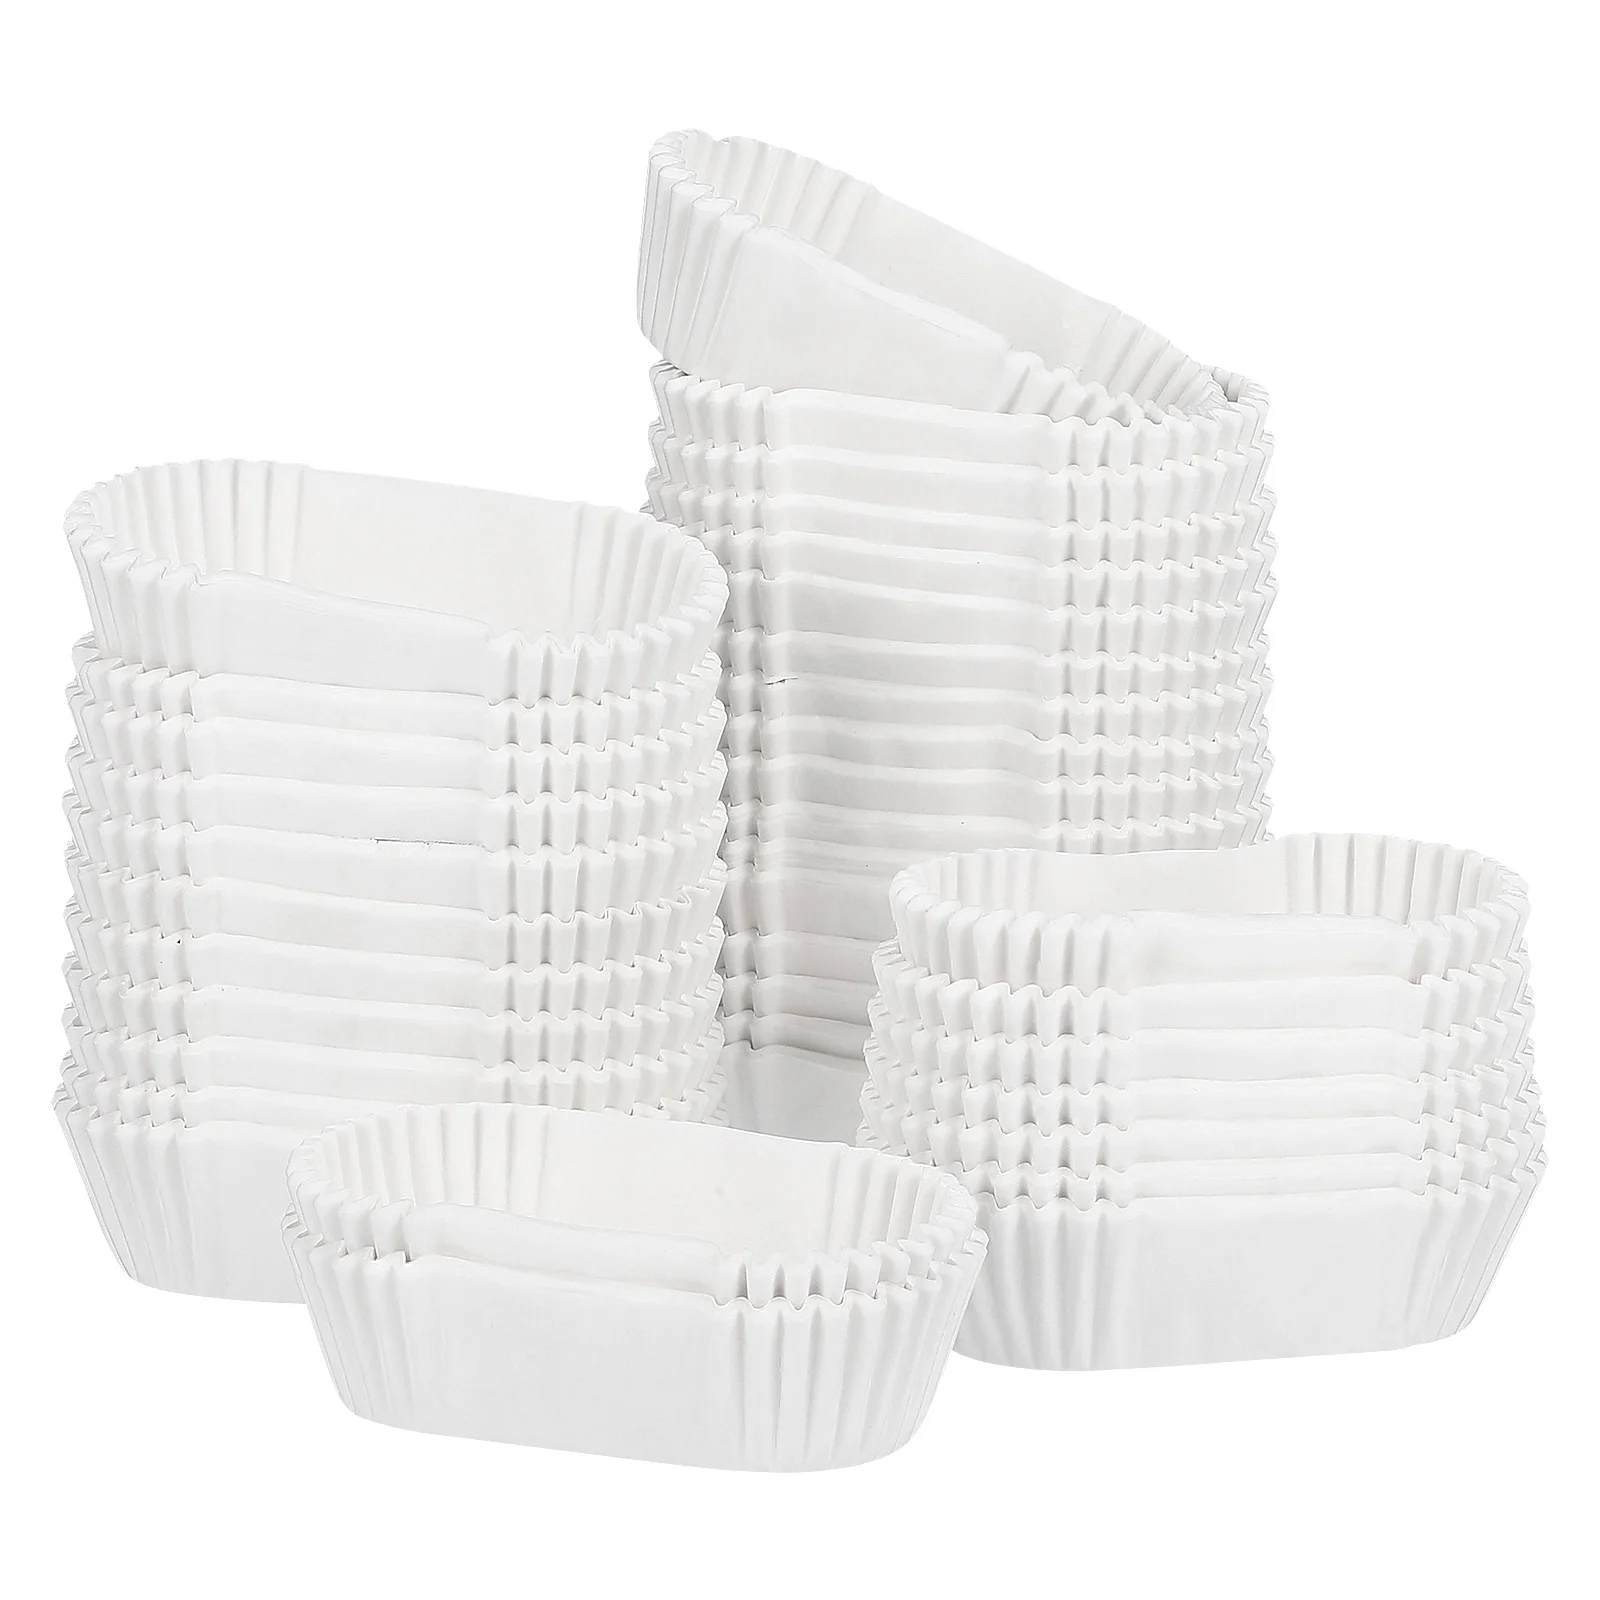 

1000 Pcs White Wrapping Paper Cake Case Bread Tray Grease Proof Cupcake Liners Oval Disposable Baking Cups Wraps